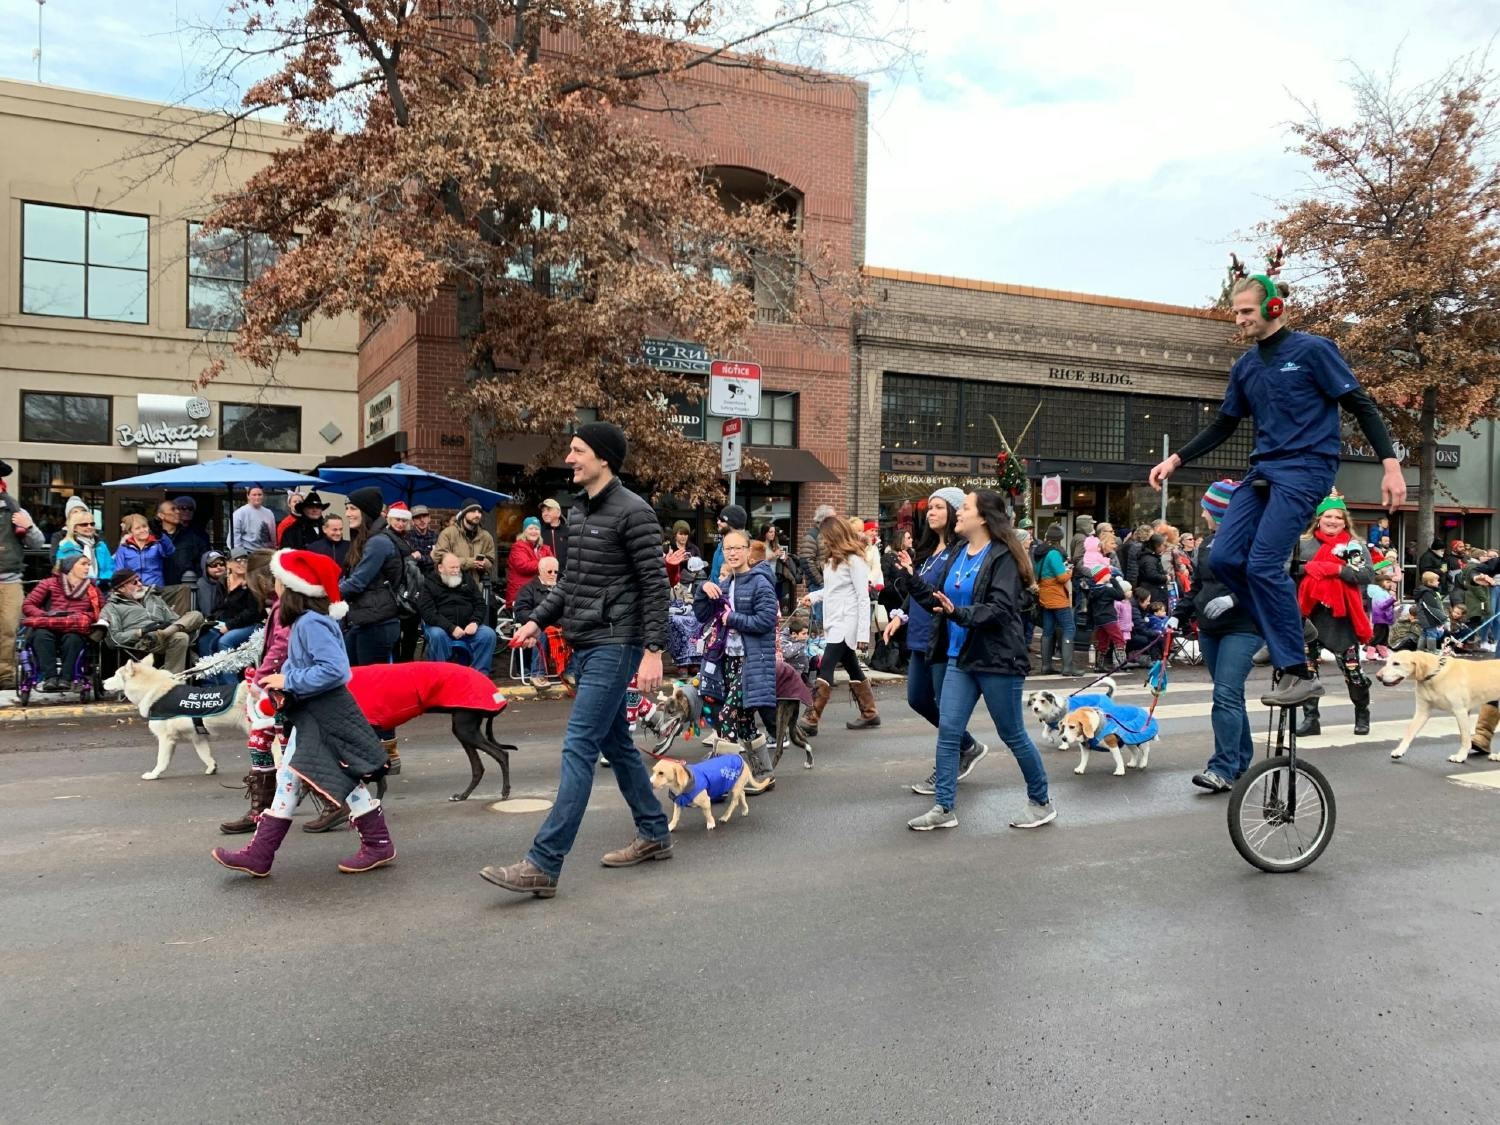 Participating in our local Christmas parade